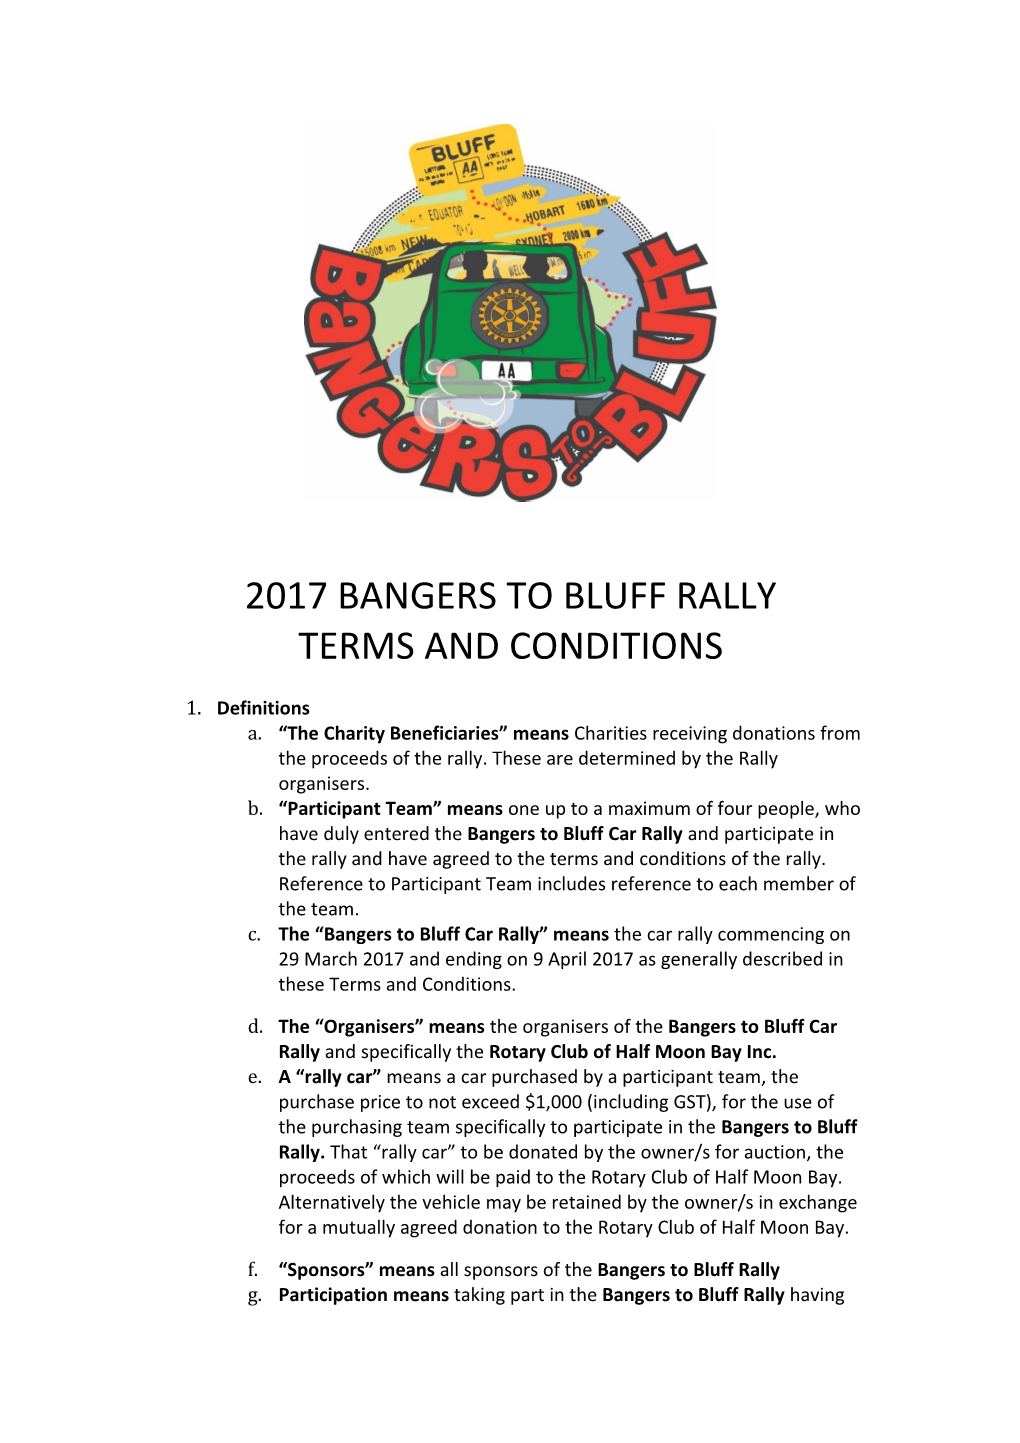 2017 Bangers to Bluff Rally